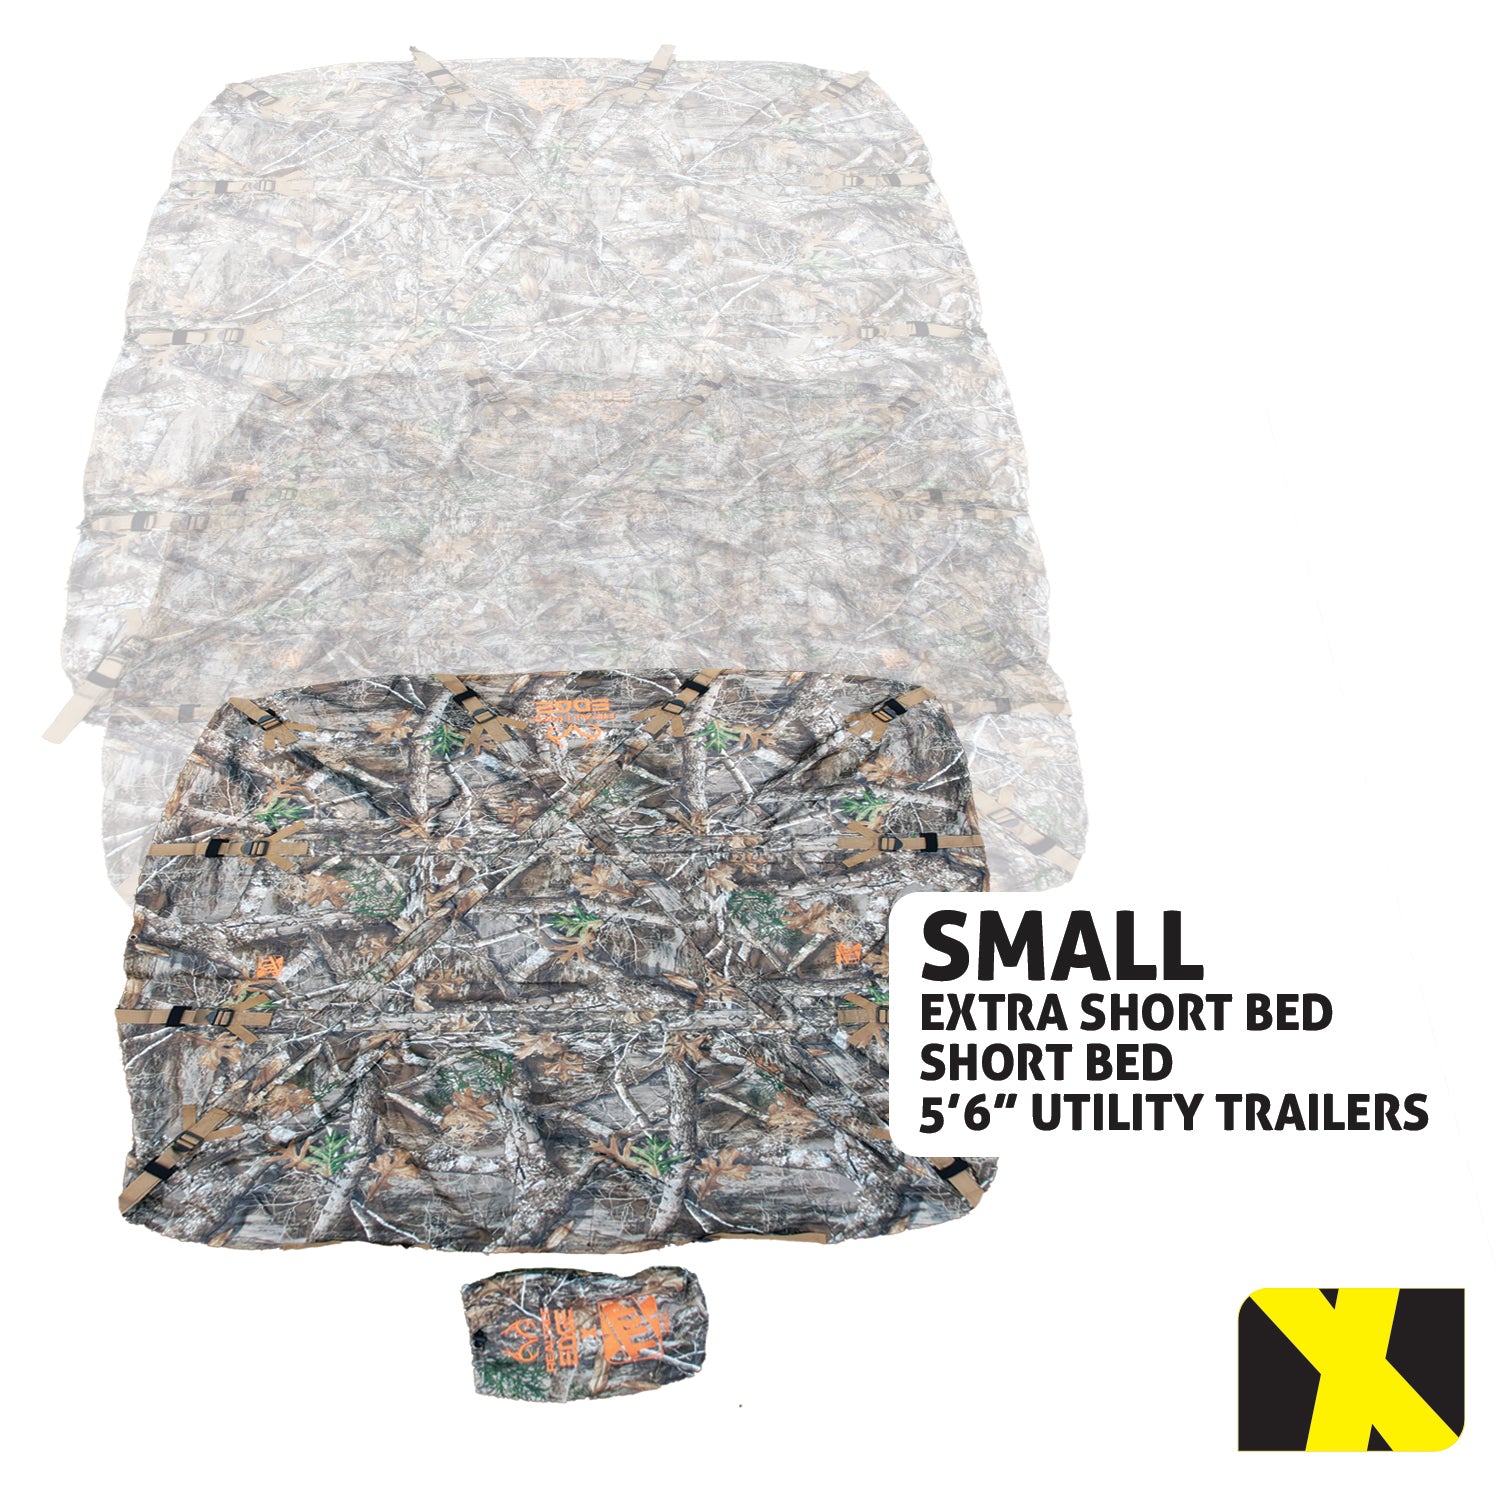 MEDIUM The X-Cover by TRPx Made with Realtree Edge Material